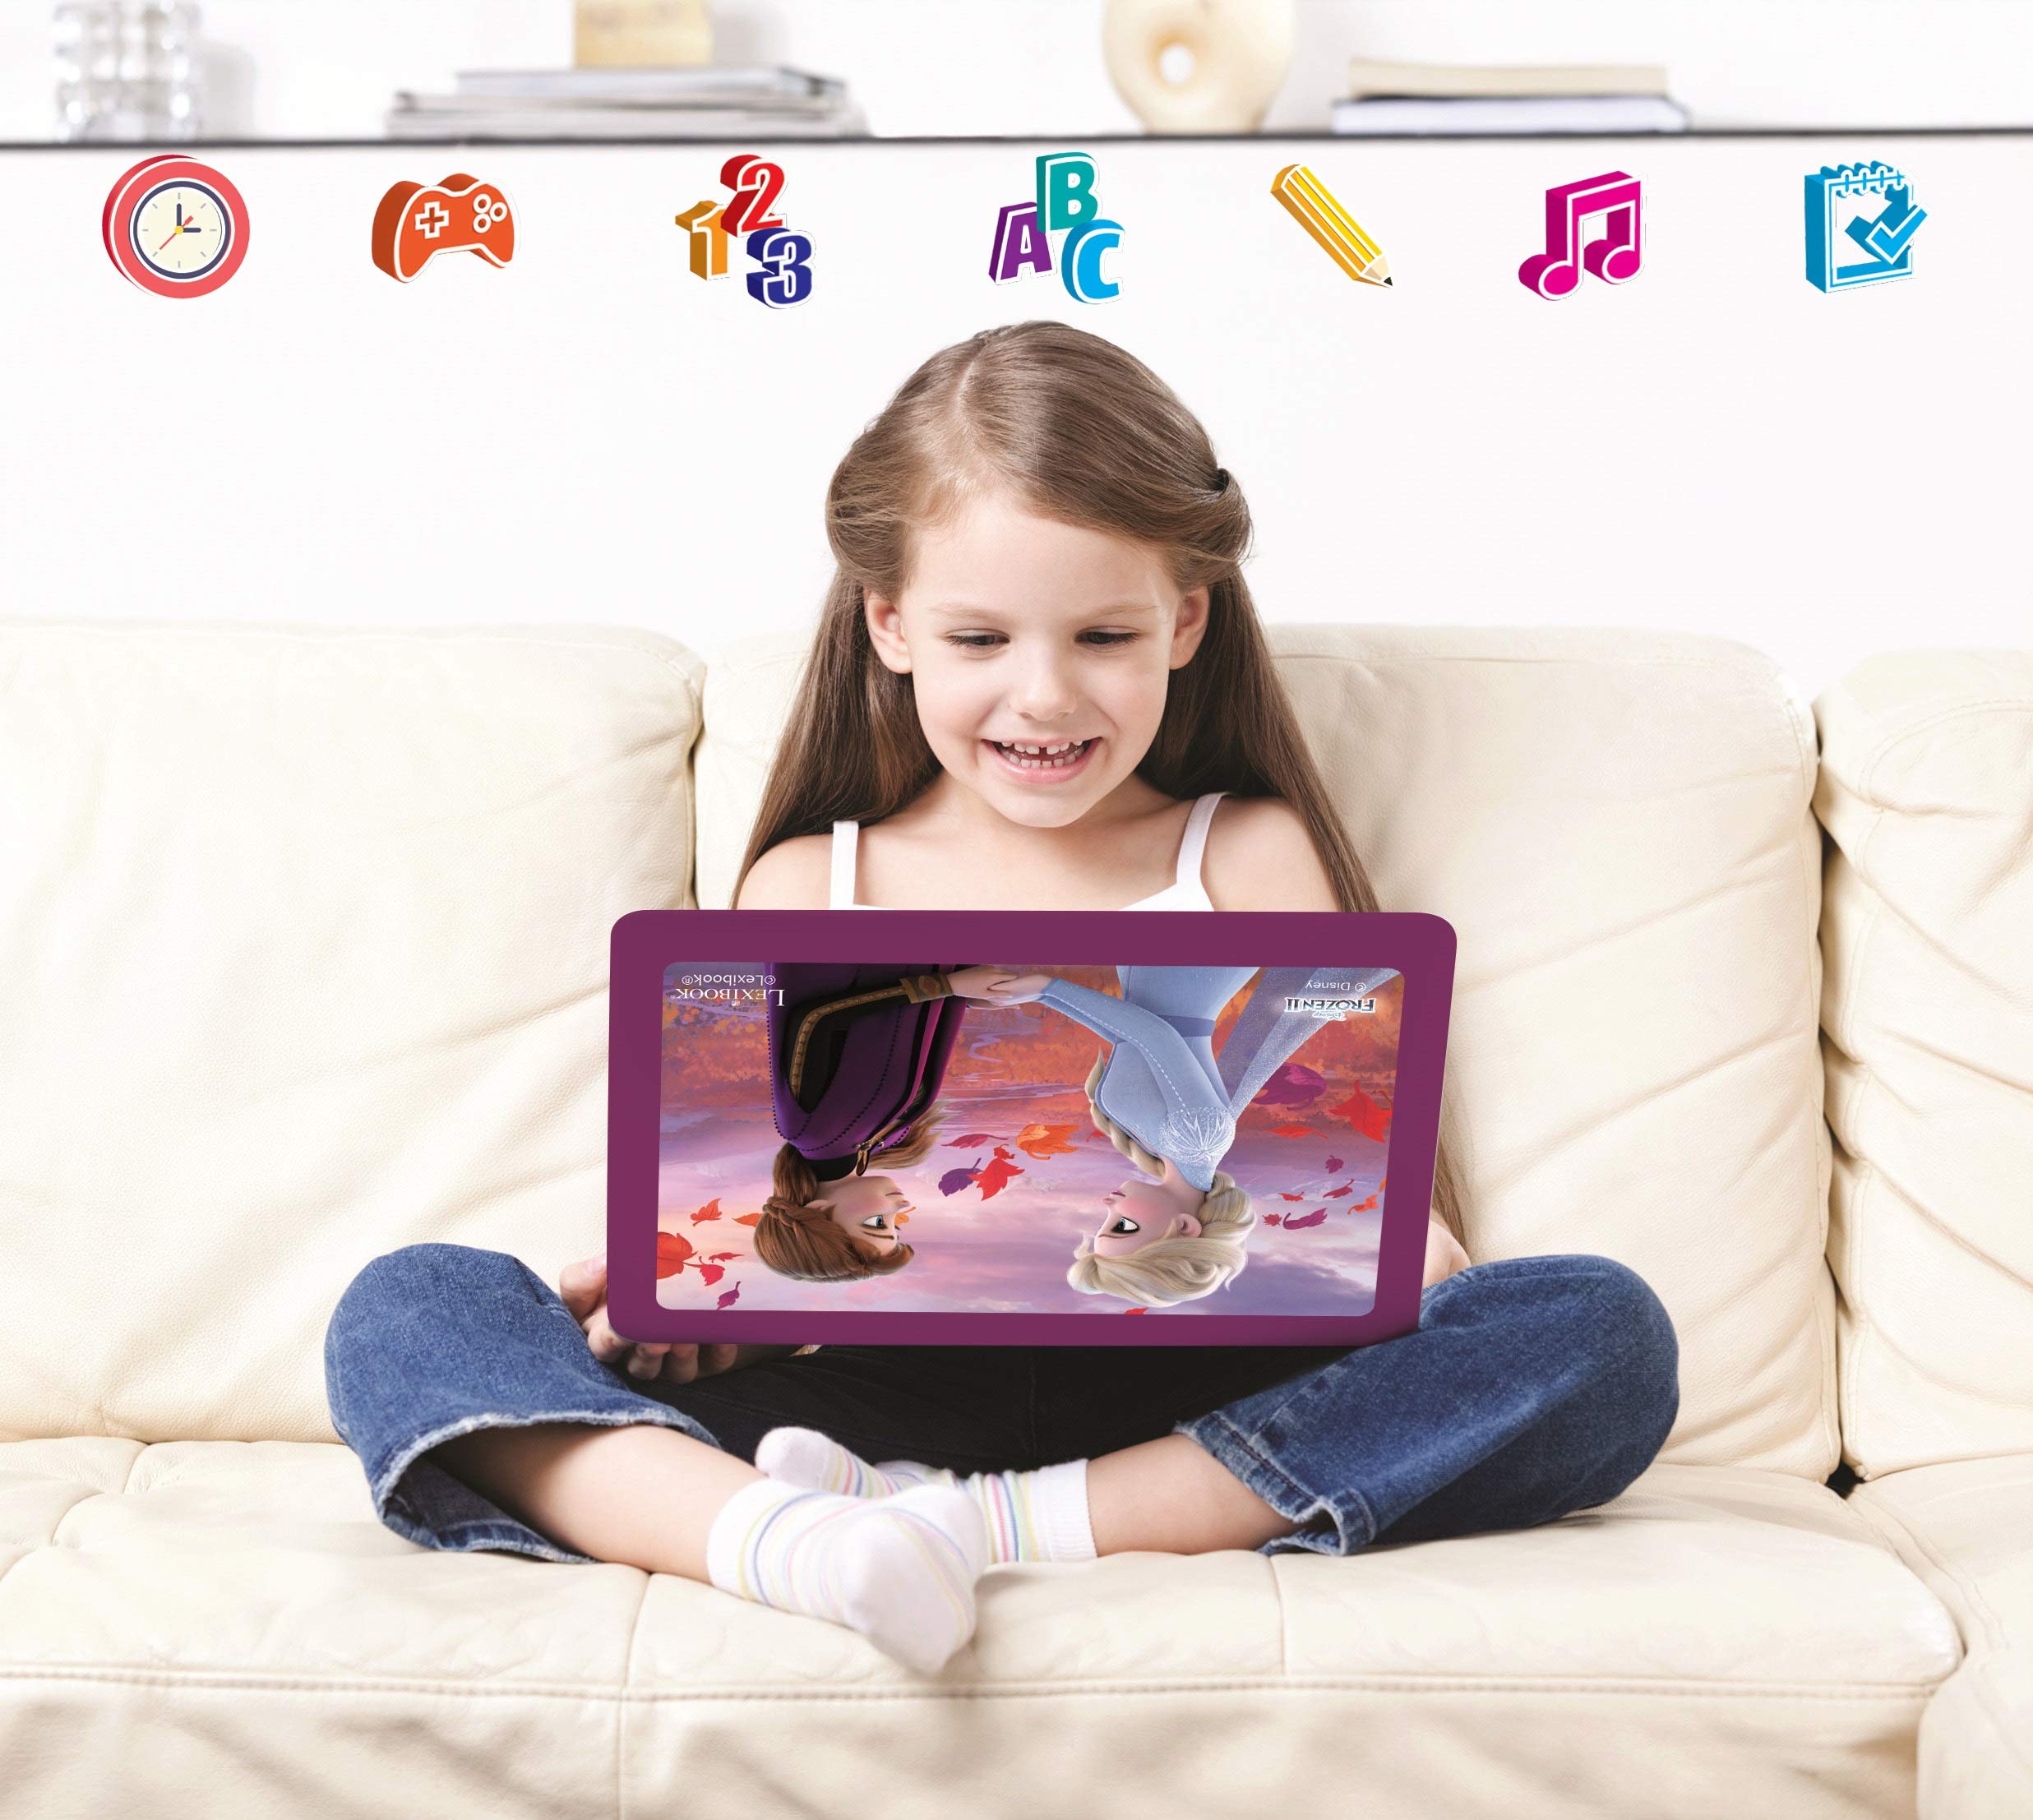 LEXiBOOK Disney Frozen 2 - Educational and Bilingual Laptop Spanish/English - Girls Toy with 124 Activities to Learn, Play Games and Music with Elsa & Anna - Blue/Purple, JC598FZi2